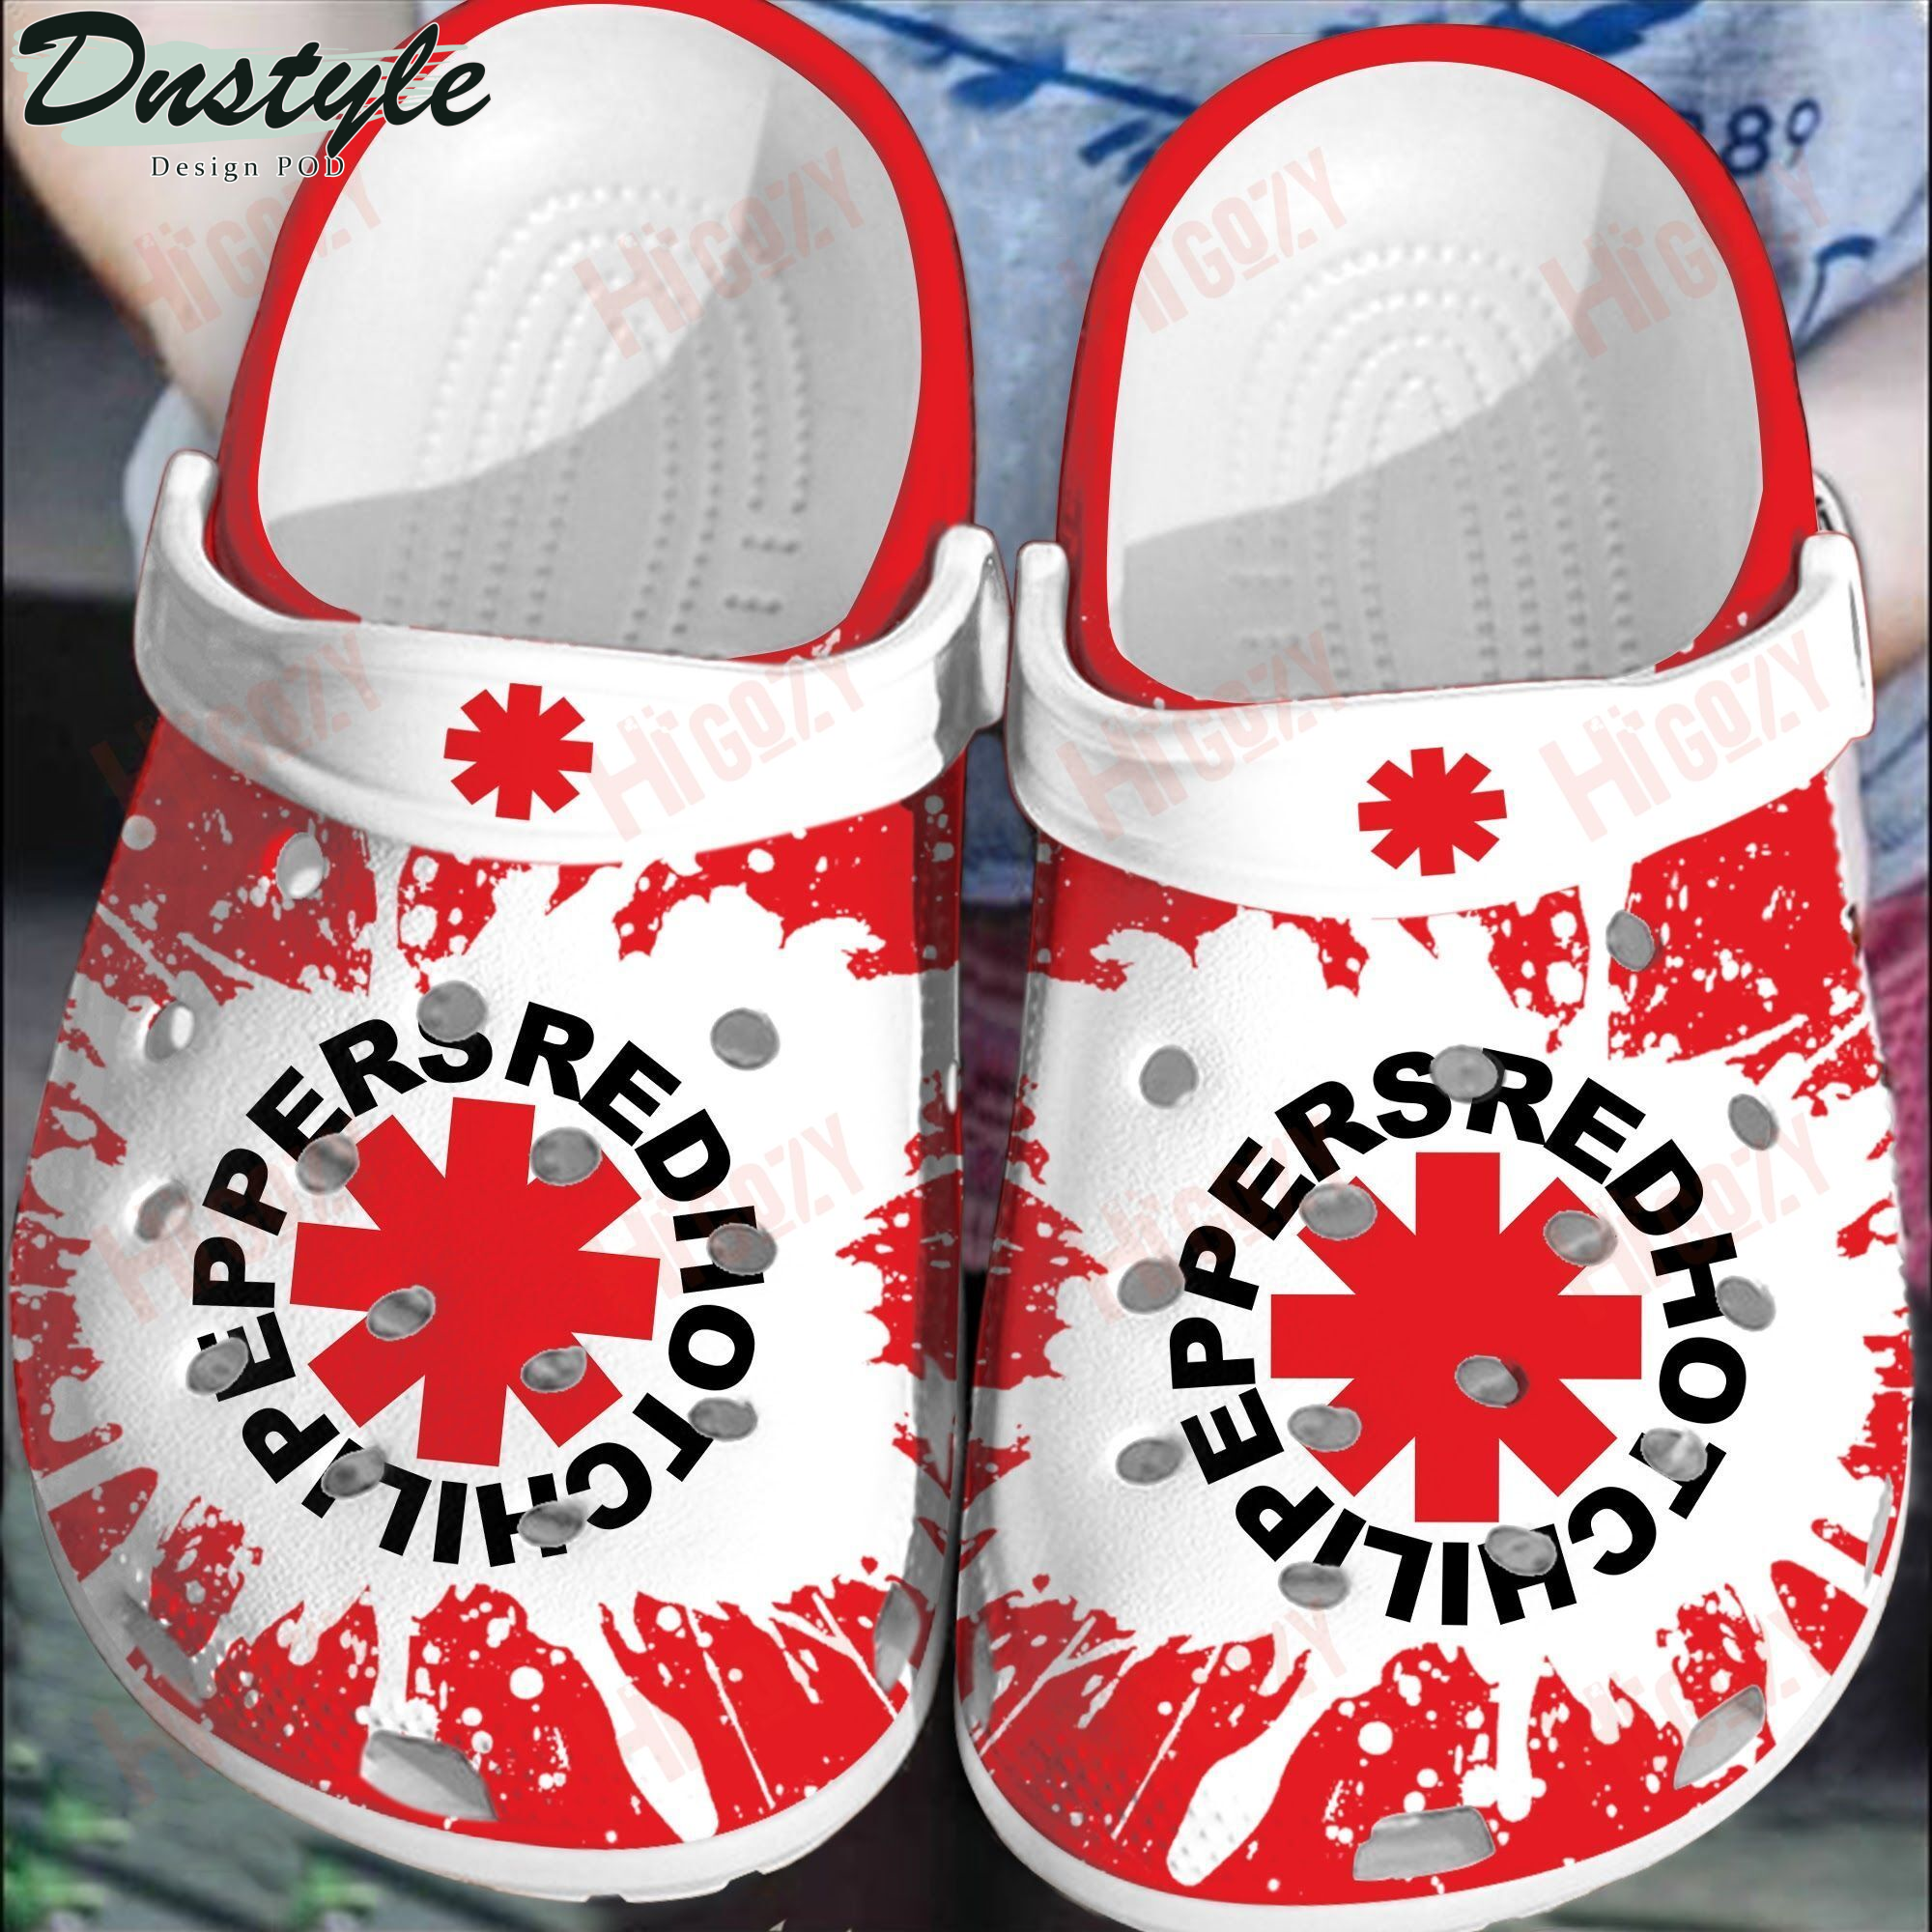 Red Hot Chili Peppers Tie Dye Crocs Crocband Clog